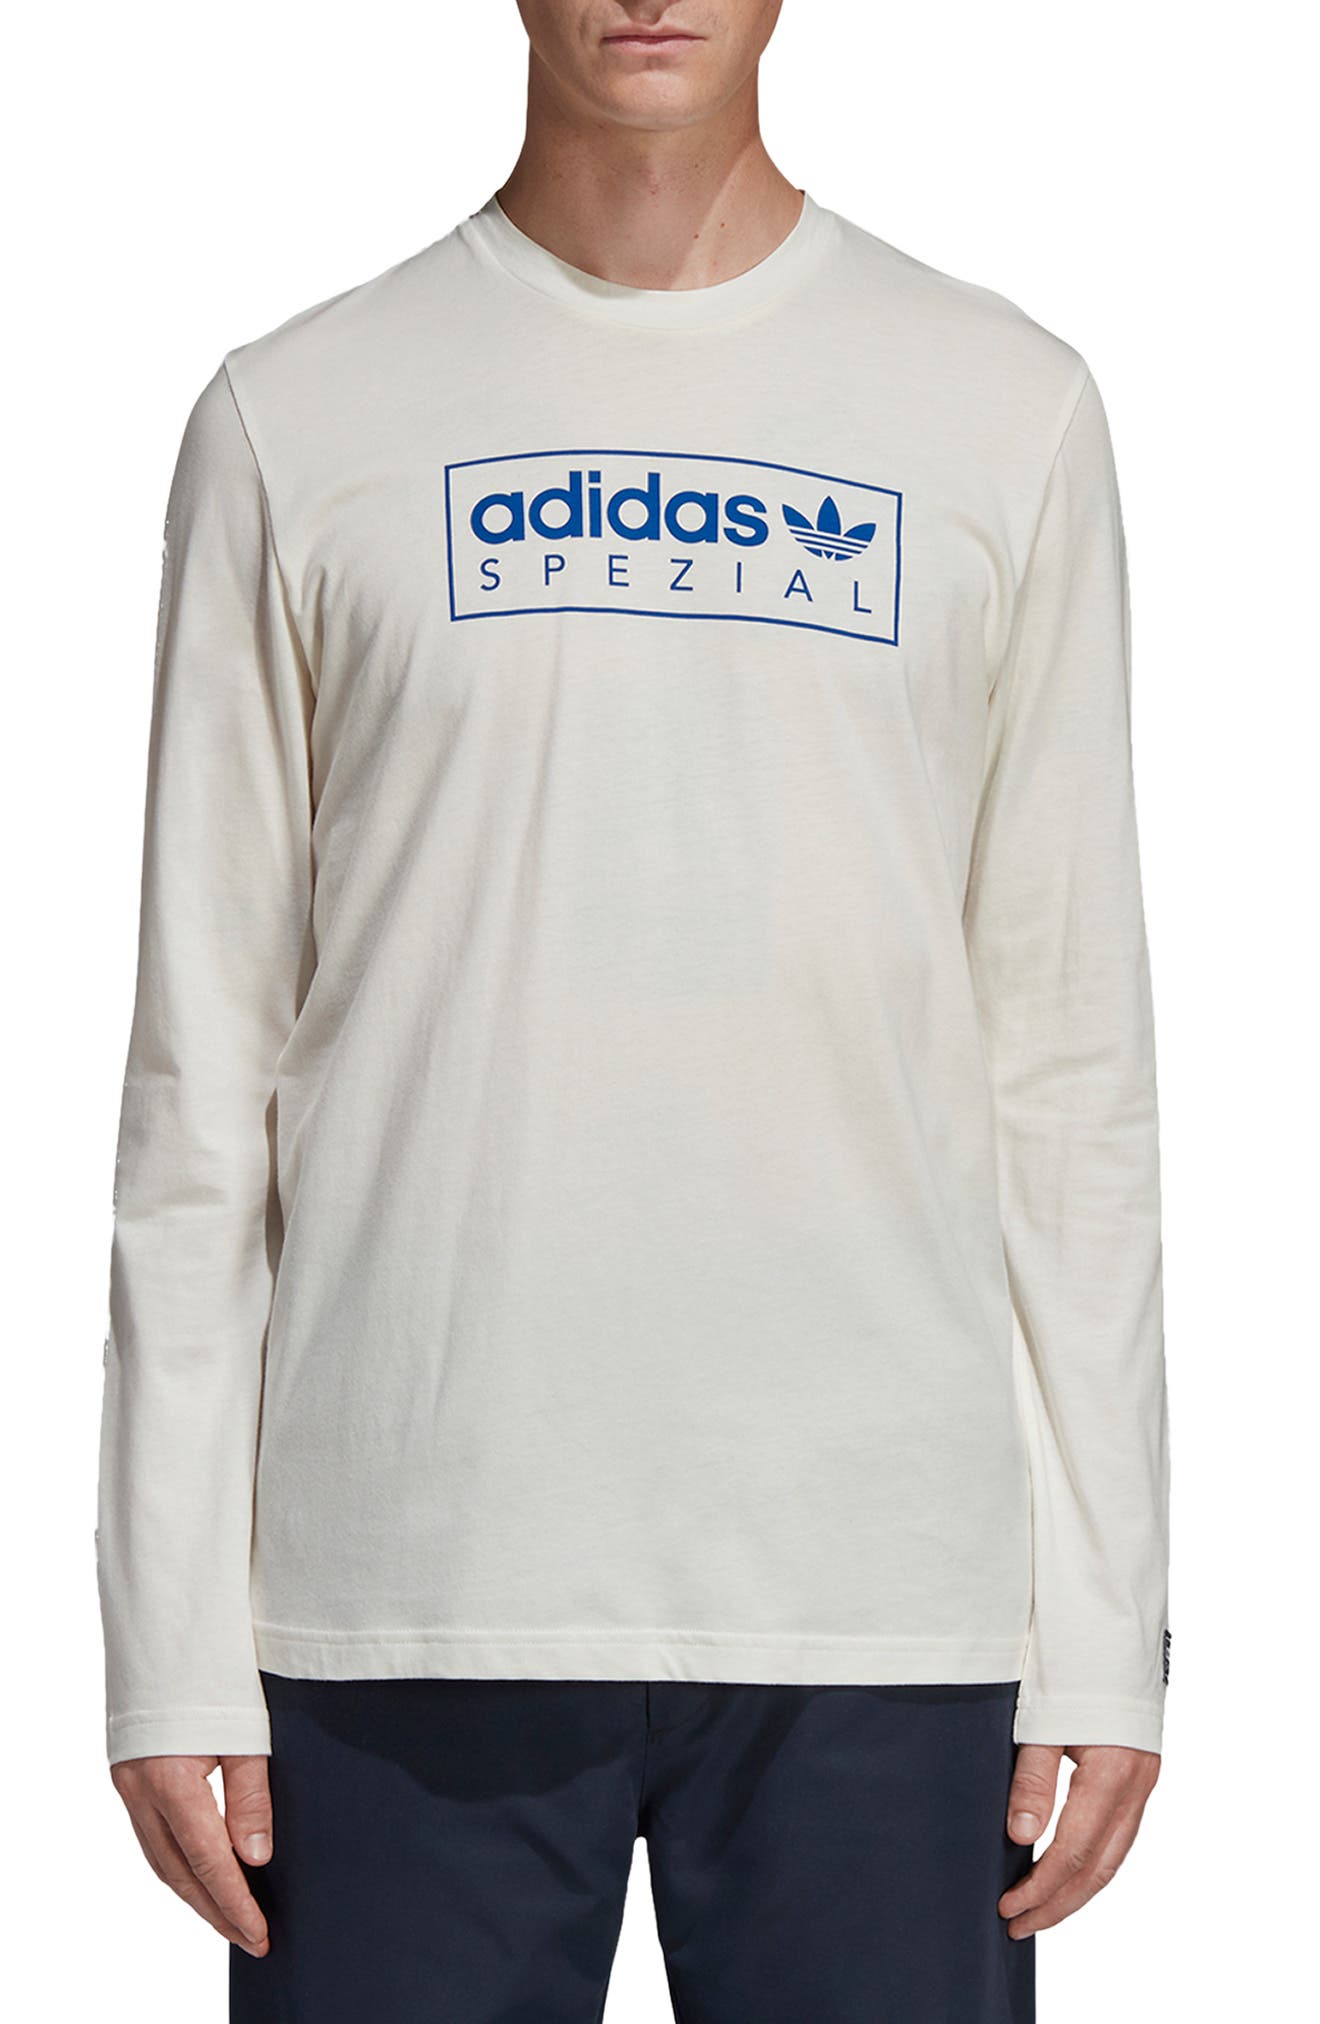 adidas Spezial Long Sleeve Graphic T 